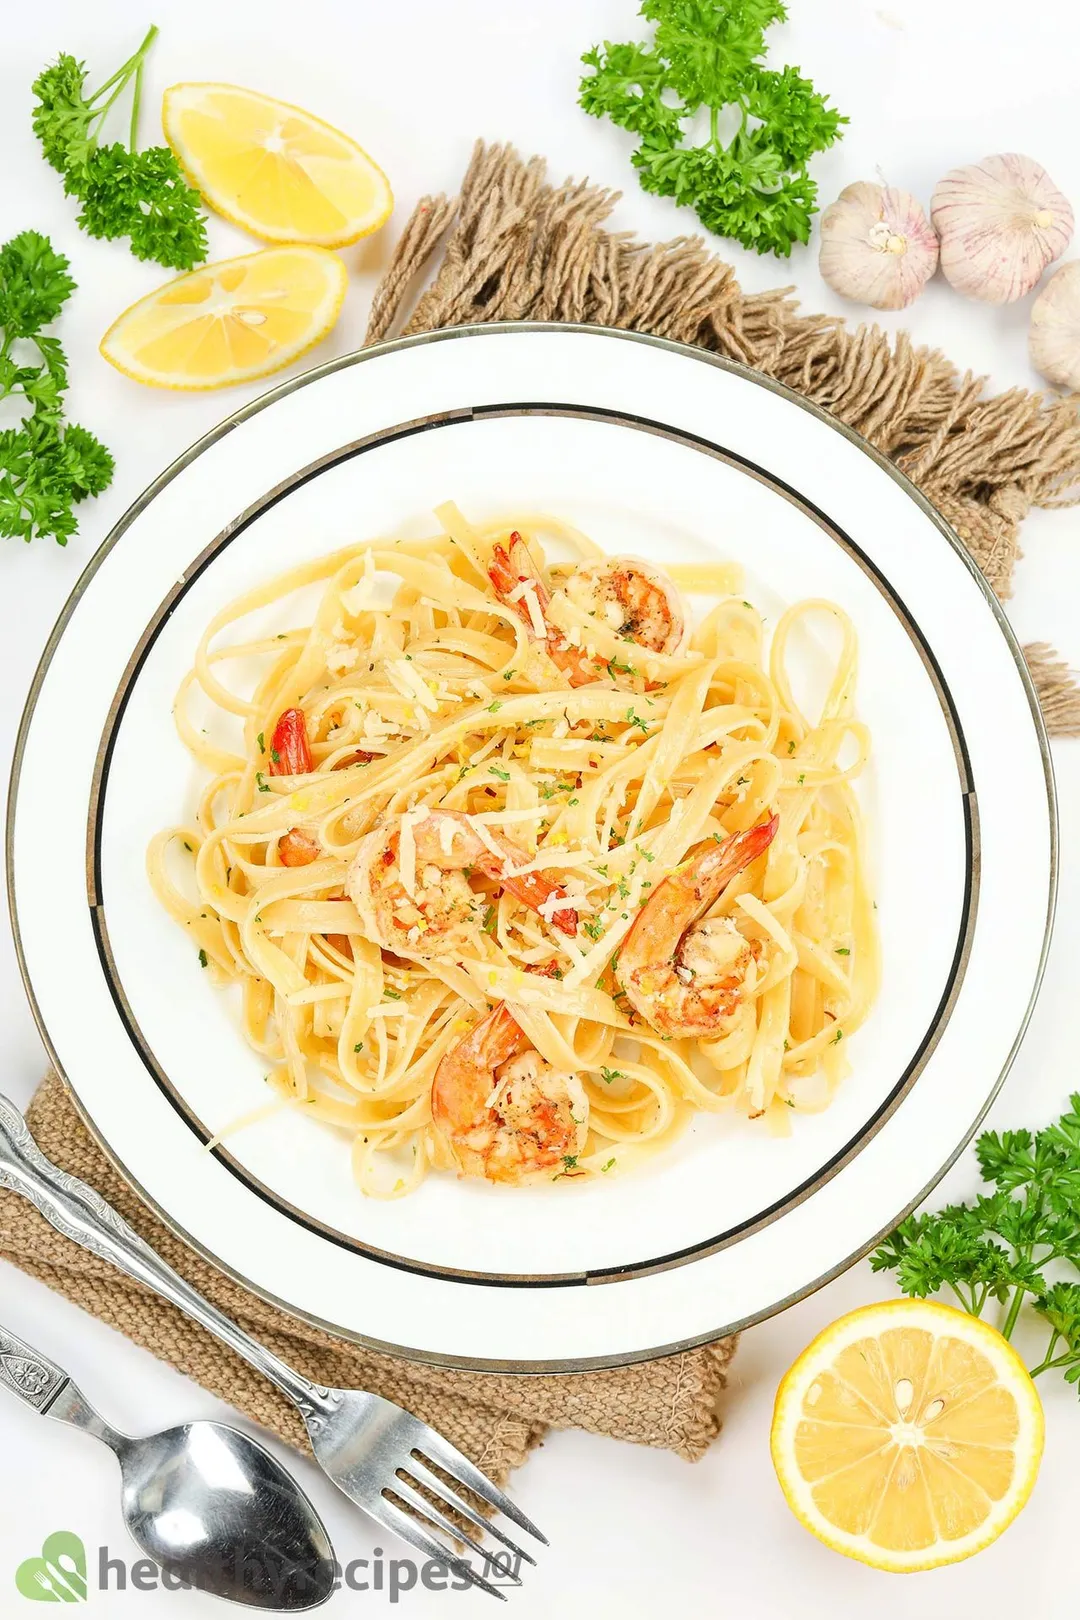 What Is Shrimp Scampi Recipes Sauce Made of